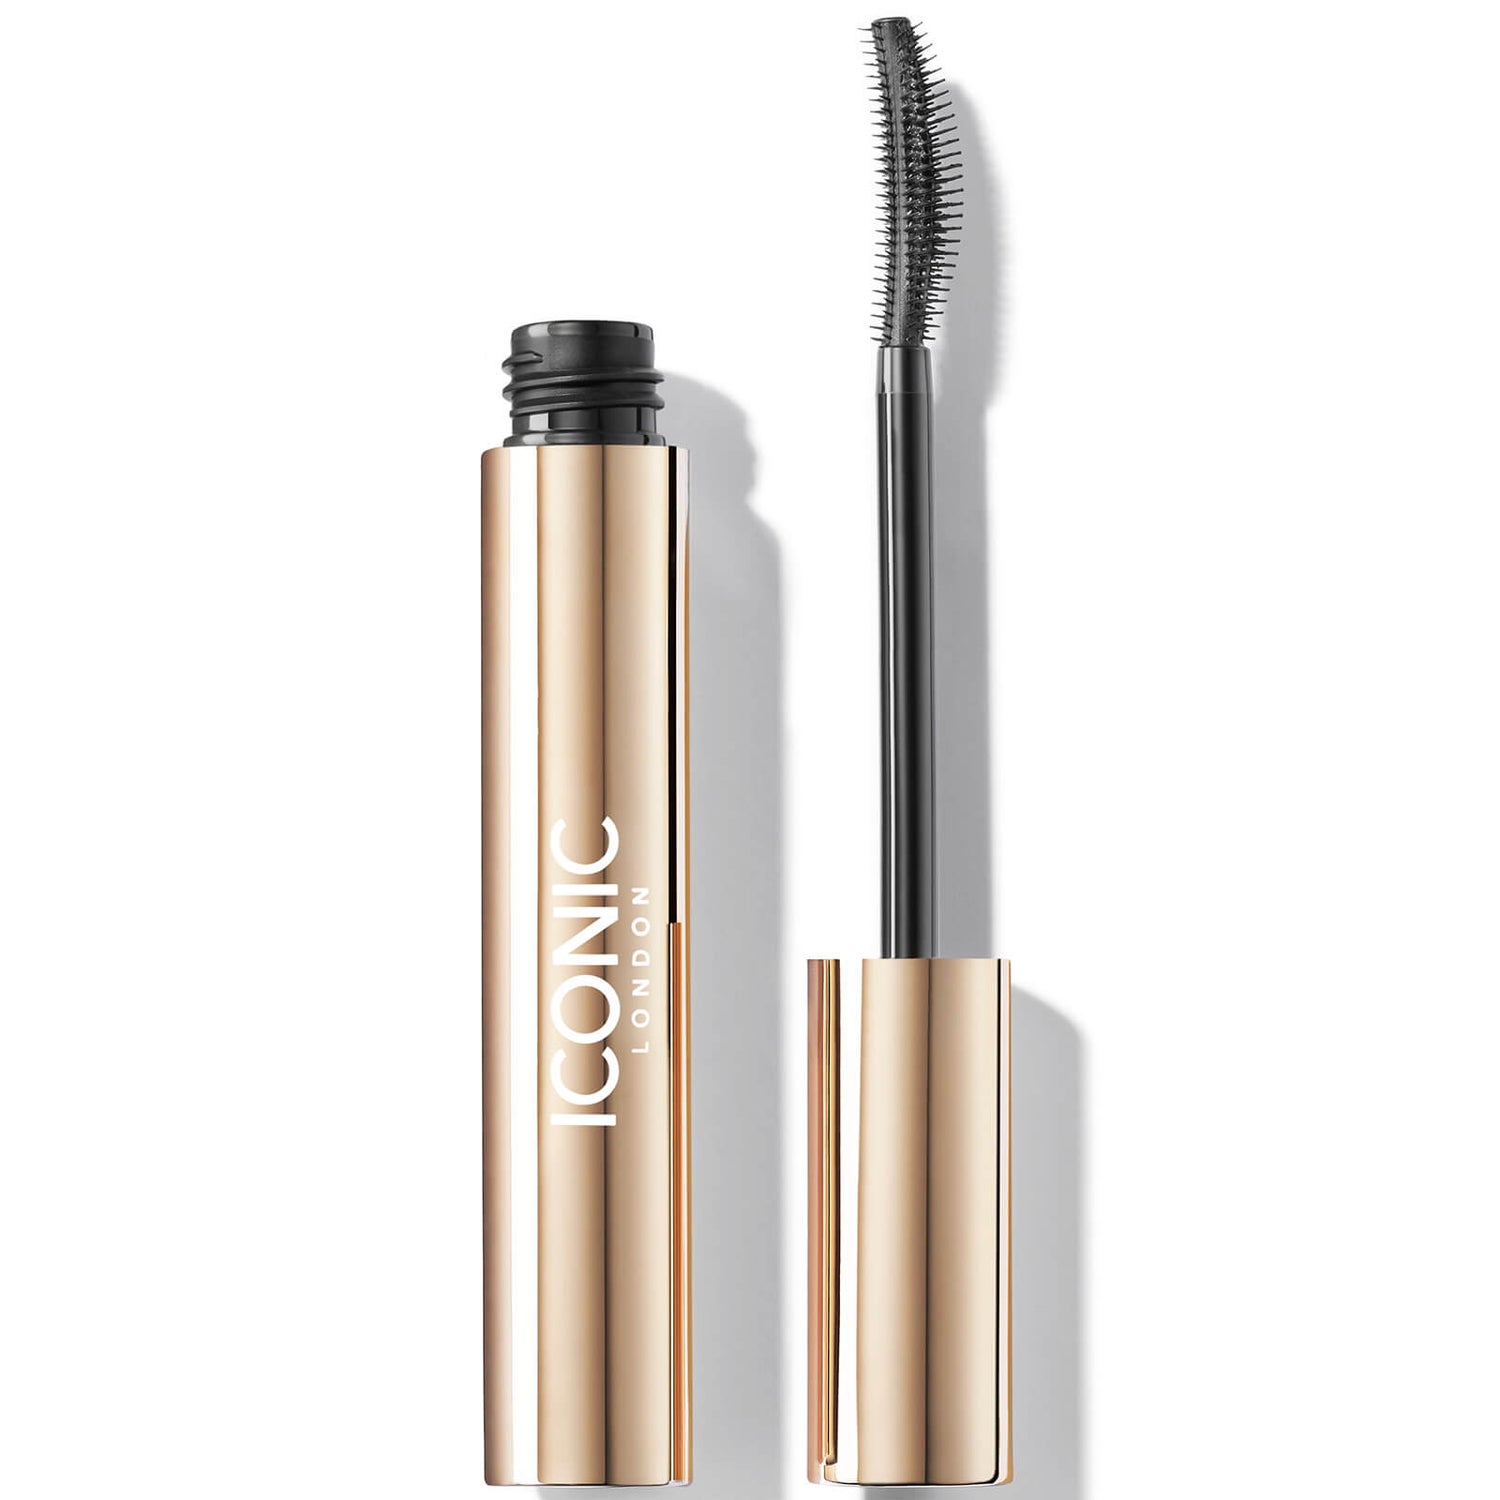 ICONIC London Enrich and Elevate Mascara - Black 7.5ml